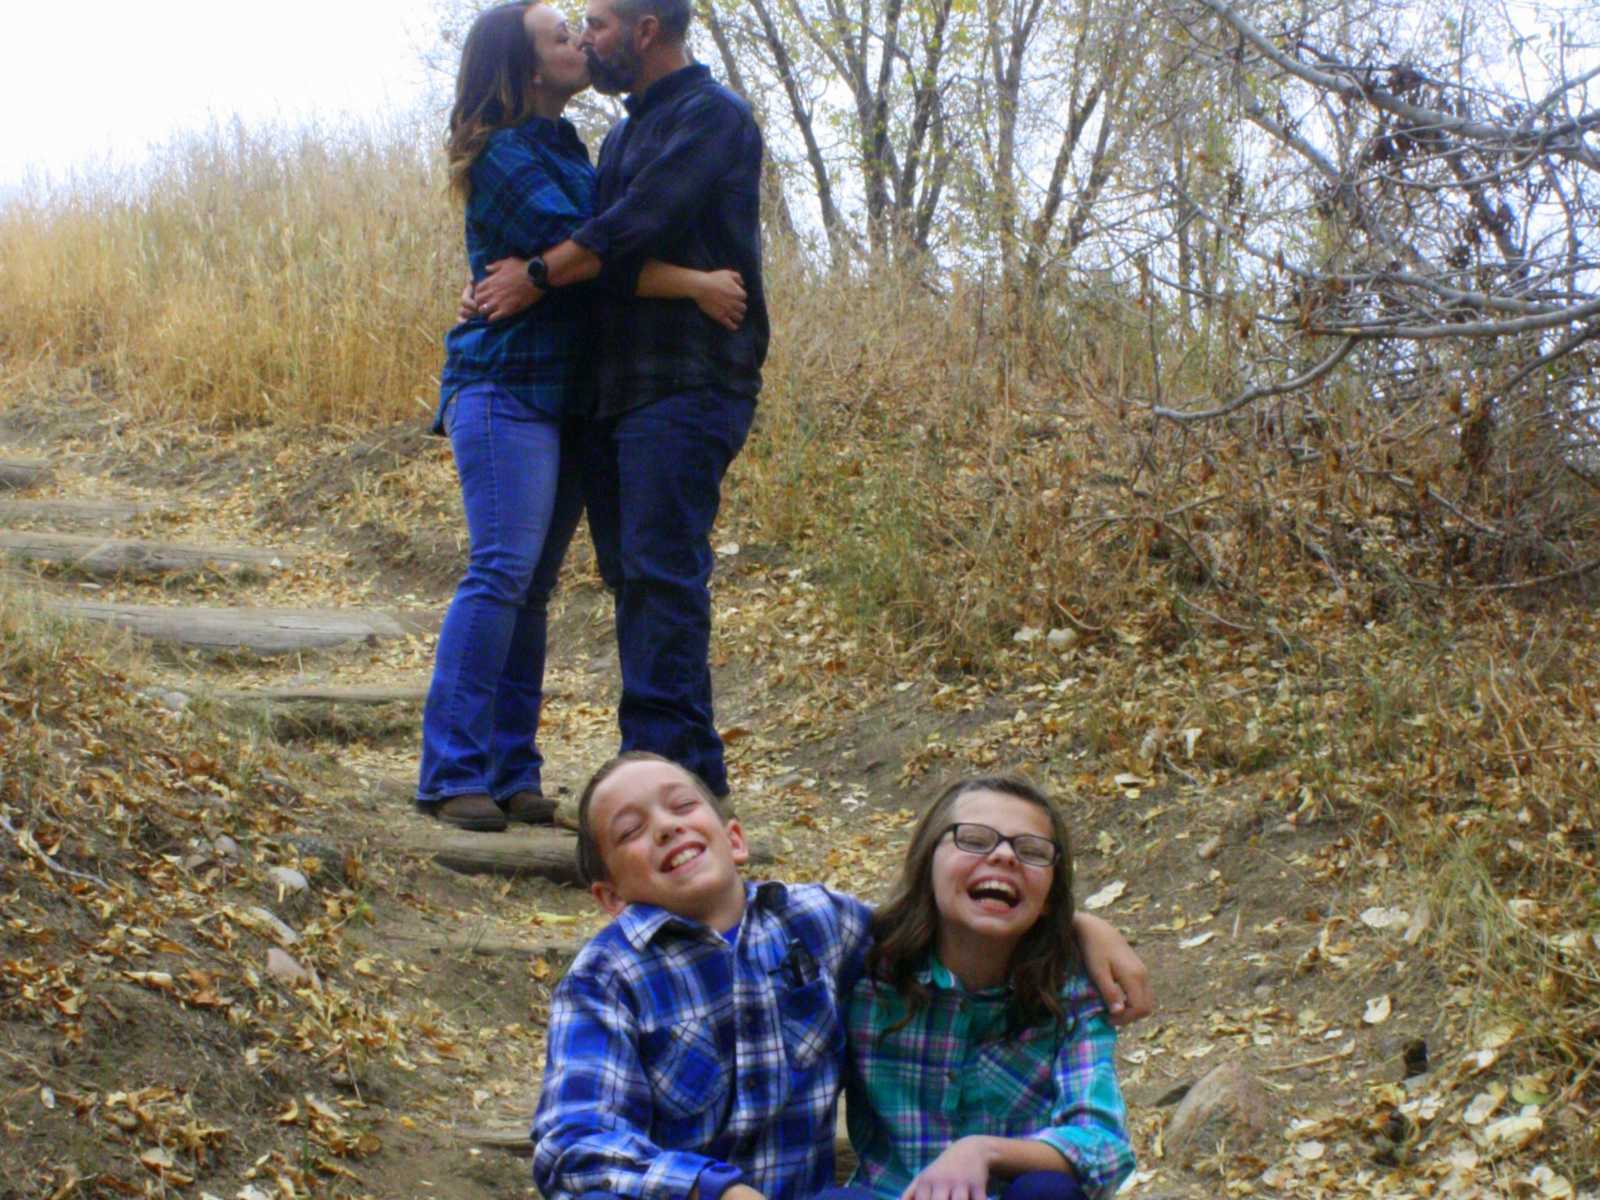 man and woman kiss on stone steps while son and daughter sit on steps below with arms around each other smiling